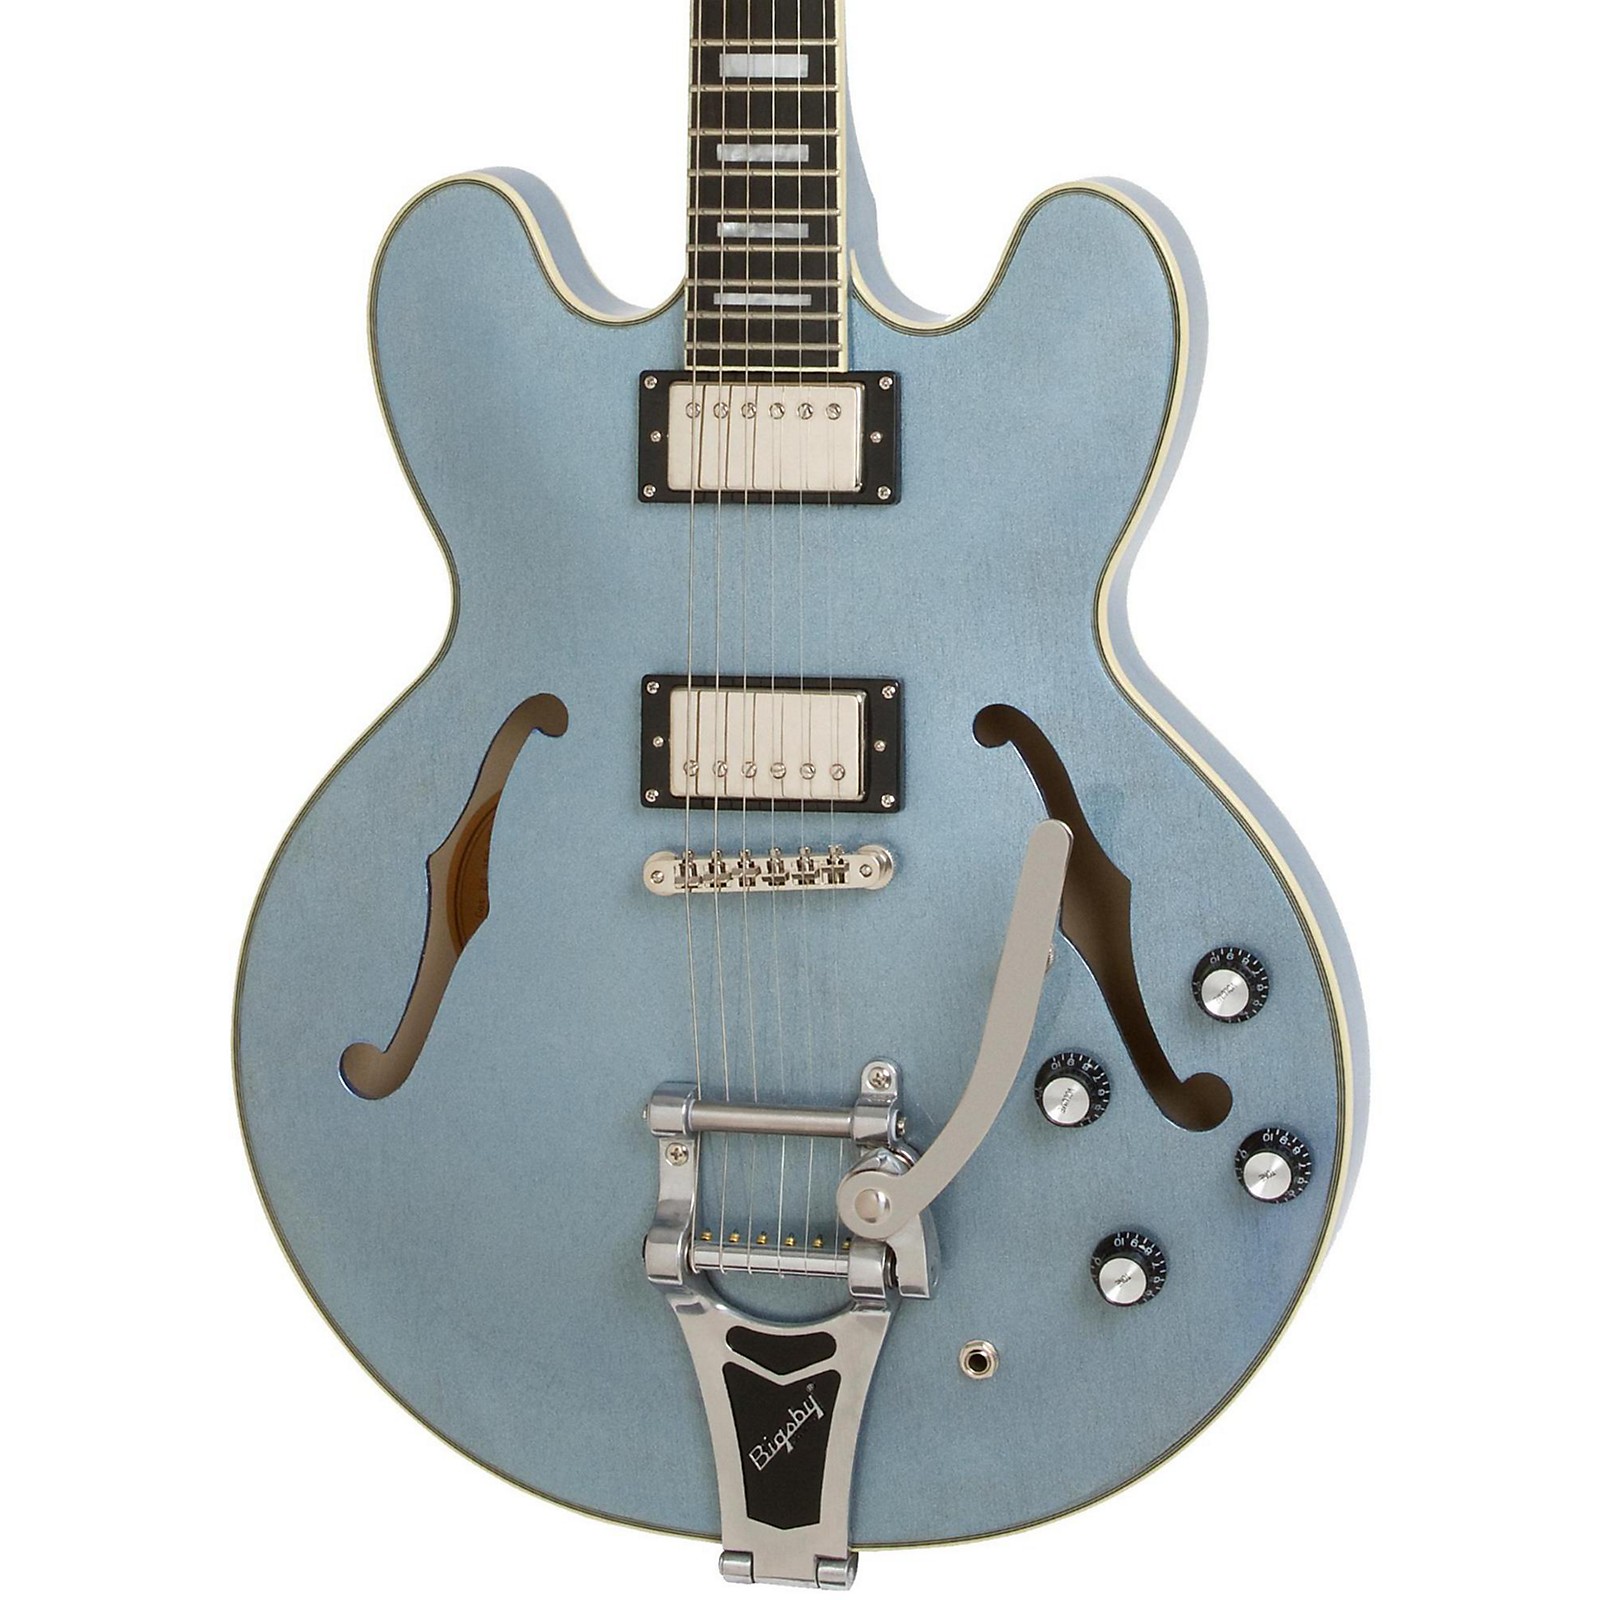 Epiphone Limited Edition ES-355 Electric Guitar | Musician's Friend